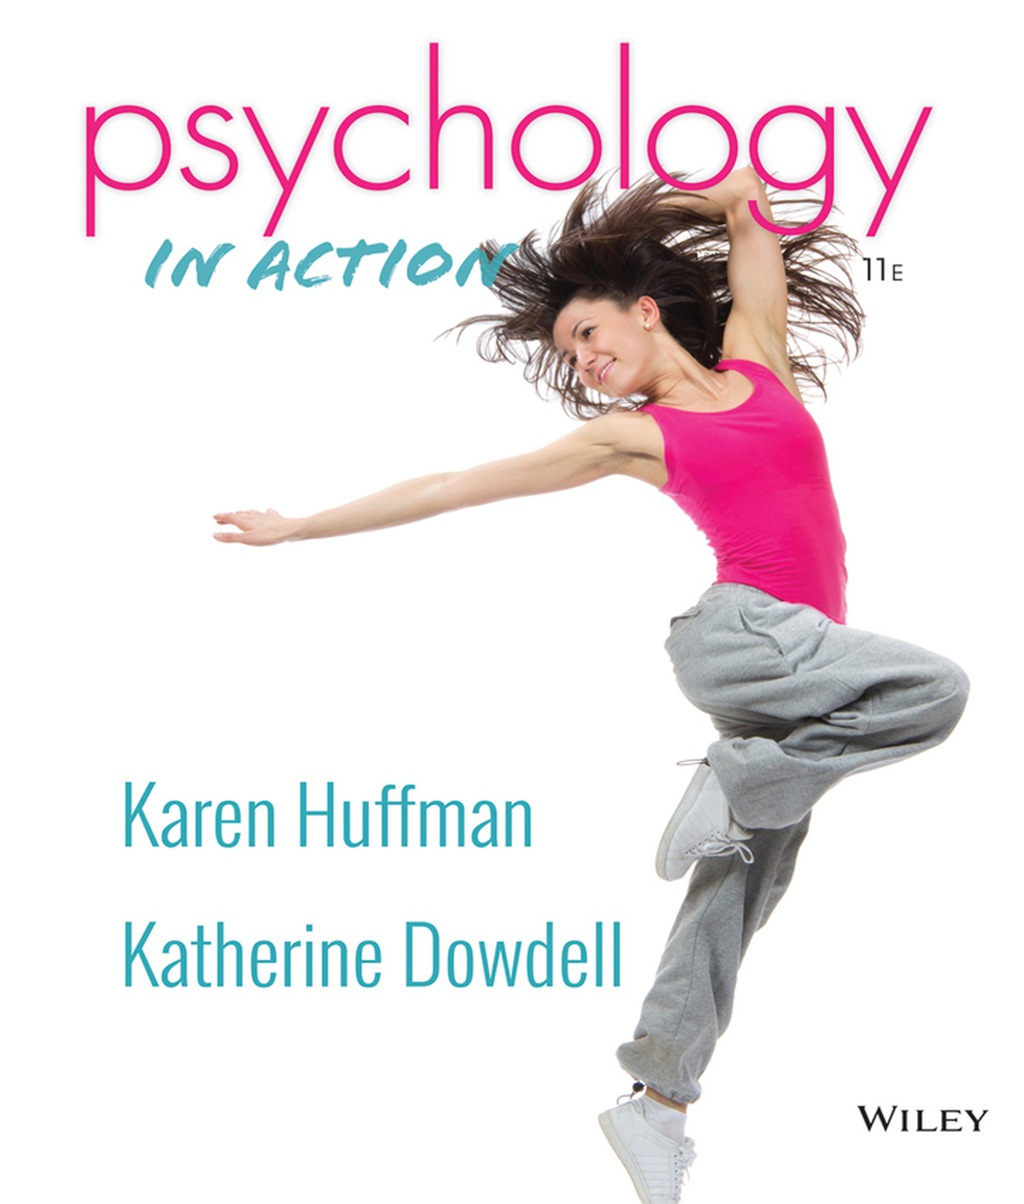 Psychology in Action - 11th Edition (eBook Rental)